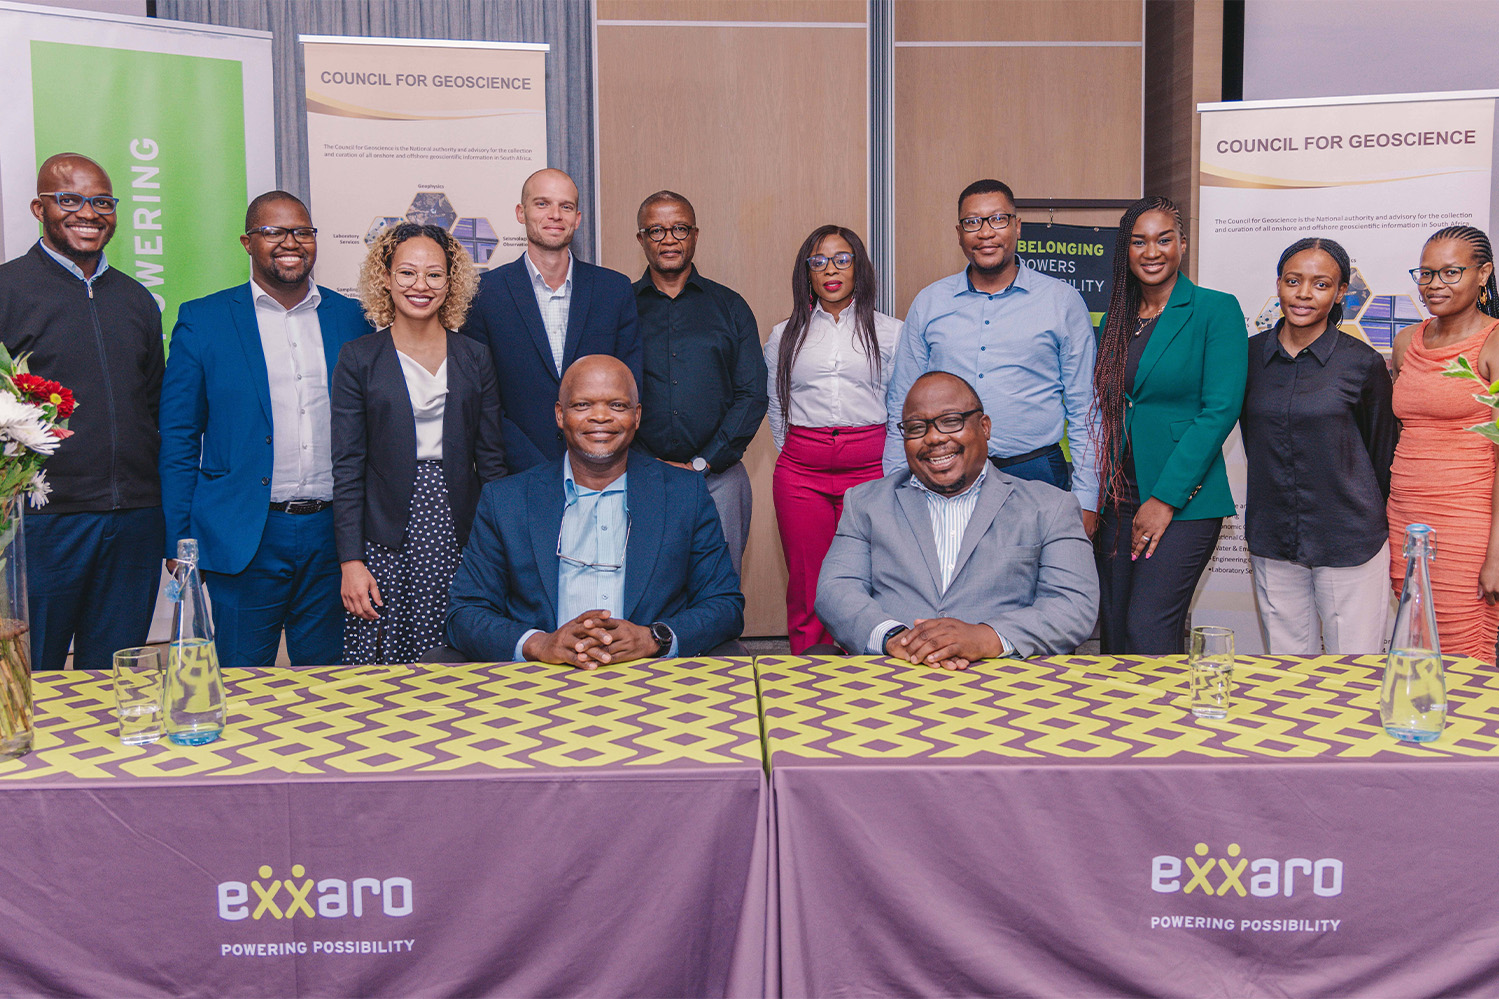 Exxaro Resources and the Council of Geoscience Unite Forces in Landmark Agreement for Decarbonisation